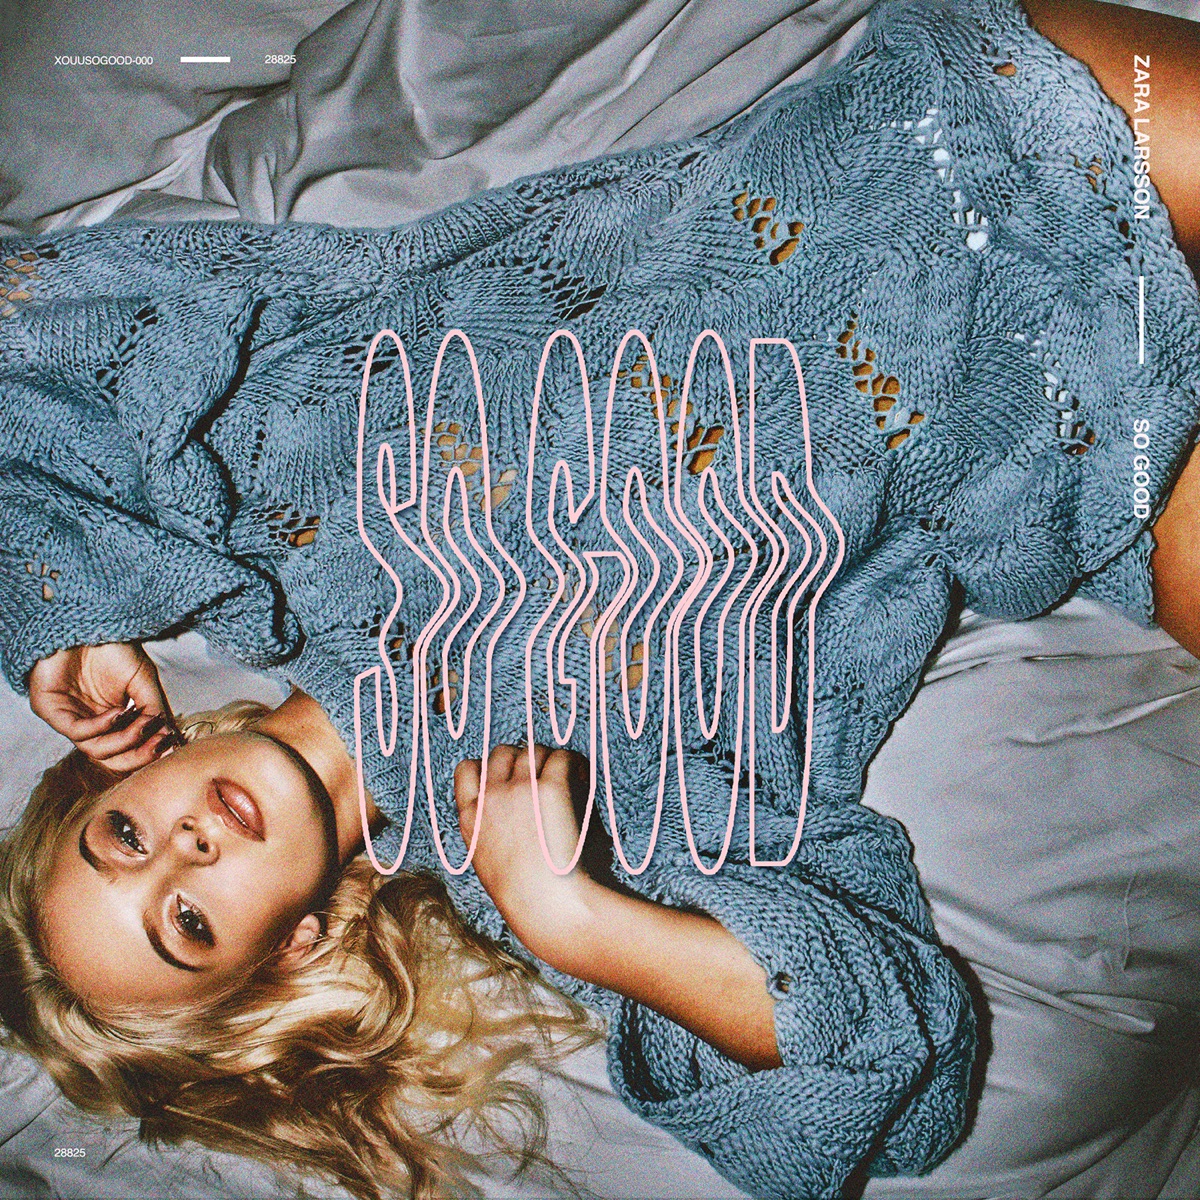 Uncover - EP by Zara Larsson on Apple Music